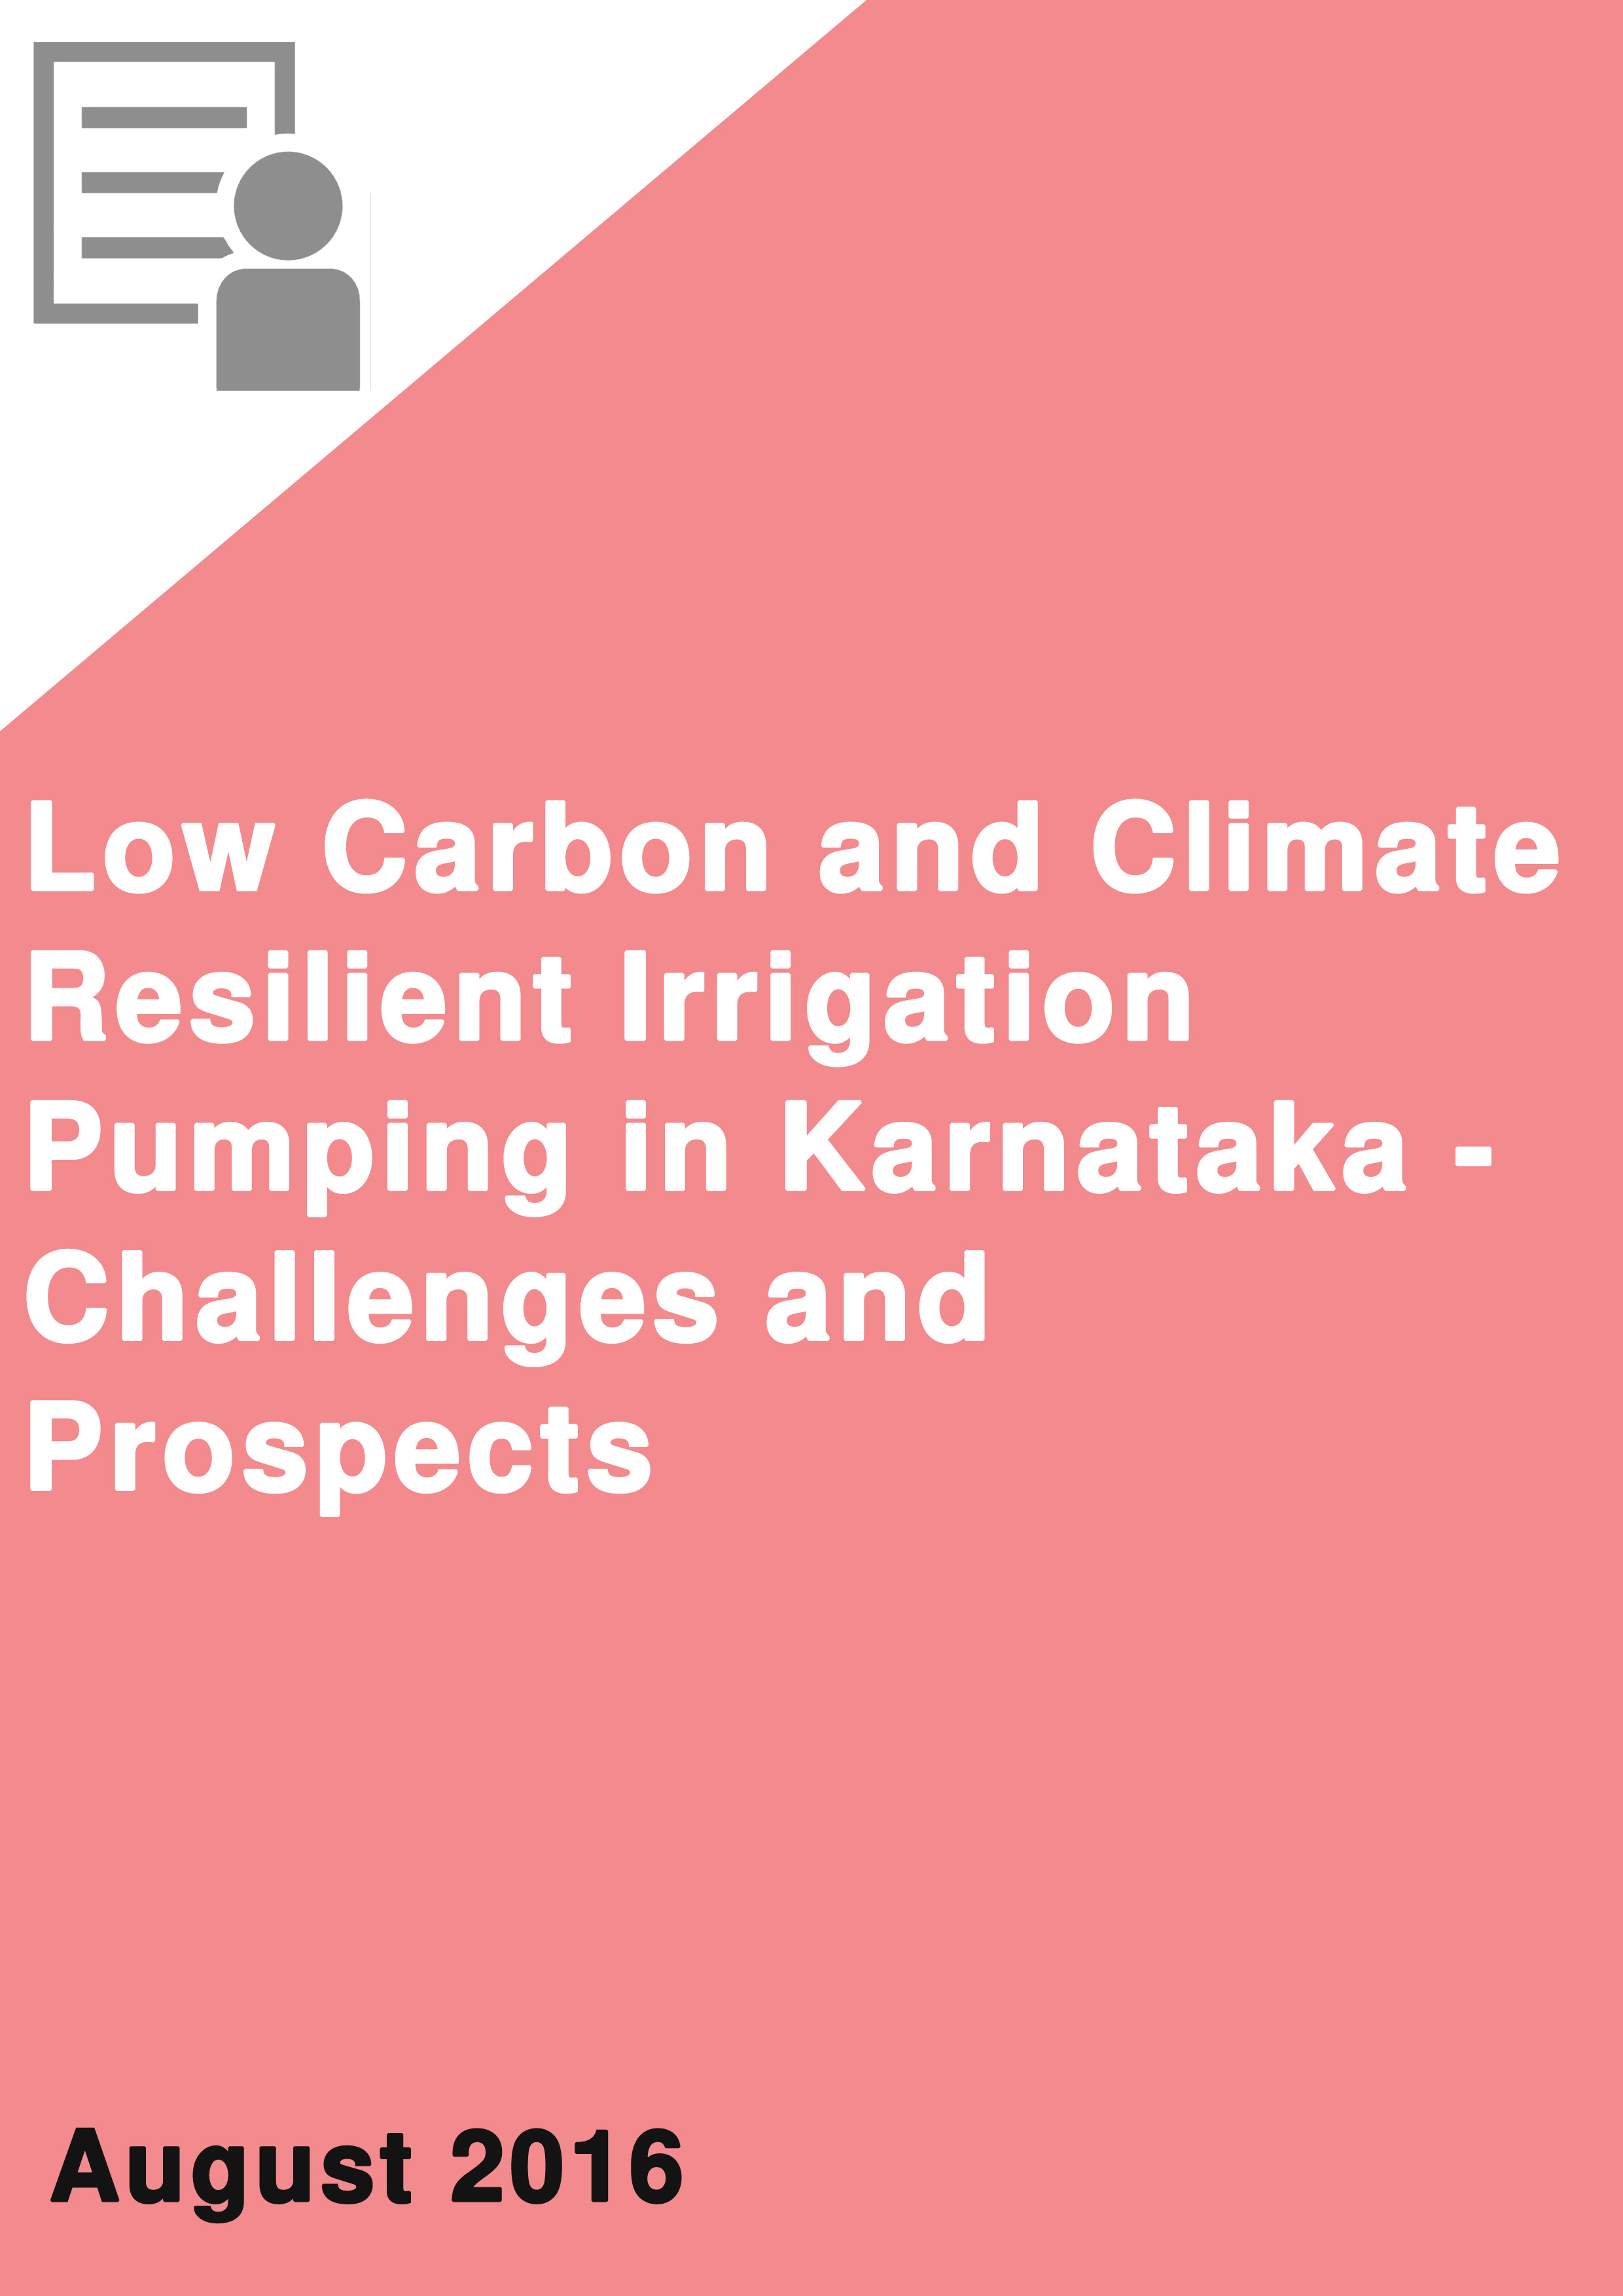 Low Carbon and Climate Resilient Irrigation Pumping in Karnataka - Challenges and Prospects